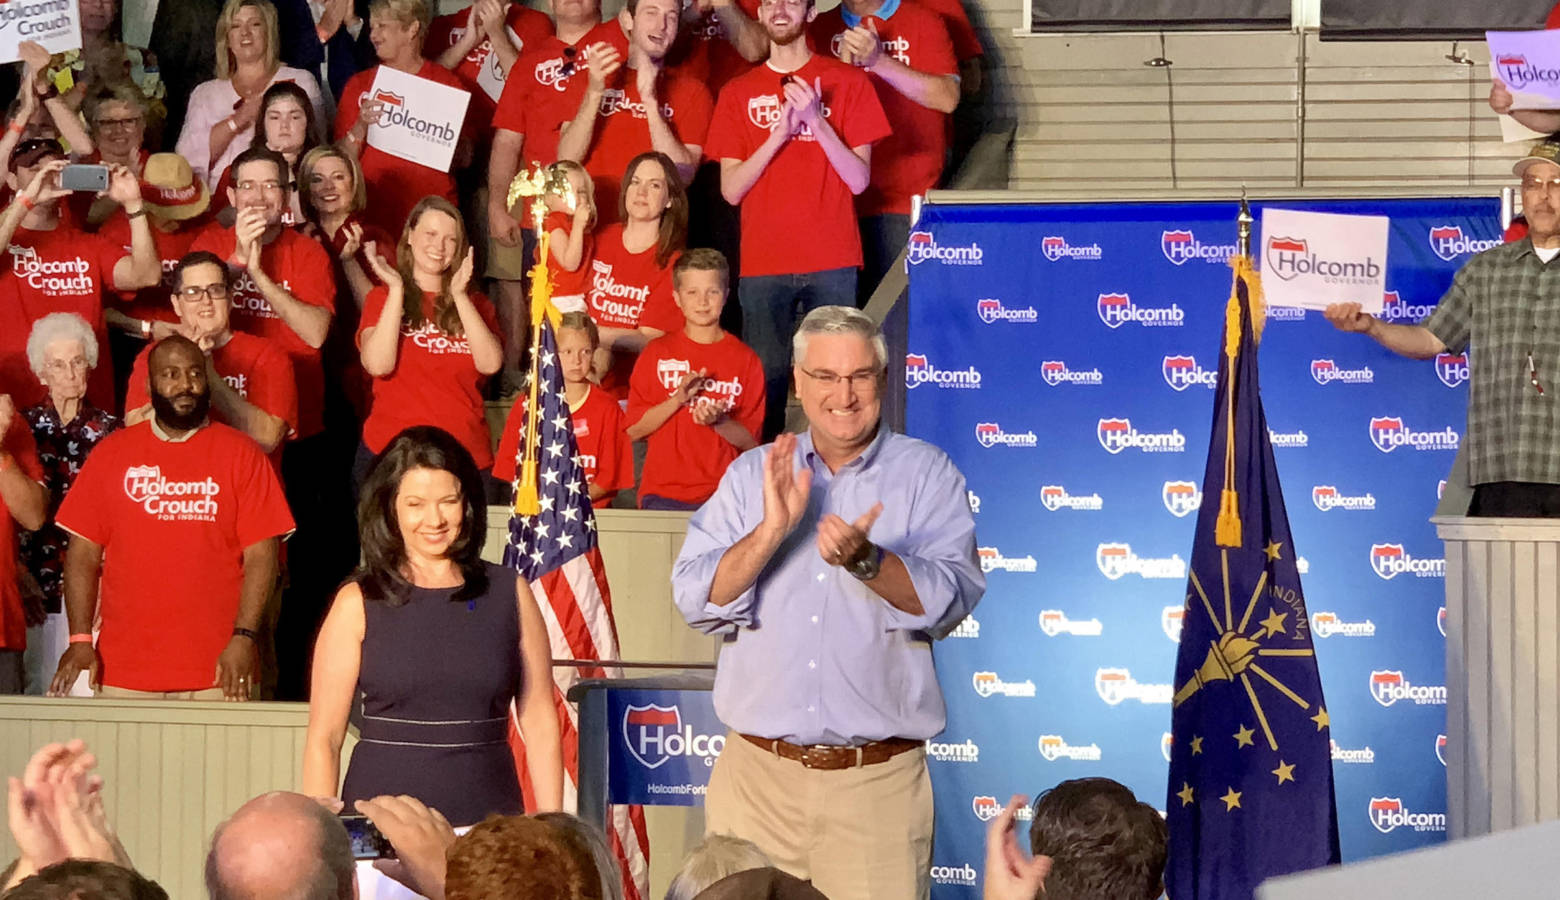 Gov. Eric Holcomb, with his wife Janet, officially launches his 2020 re-election campaign at the Hoosier Gym in Knightstown, Indiana. (Brandon Smith/IPB News)